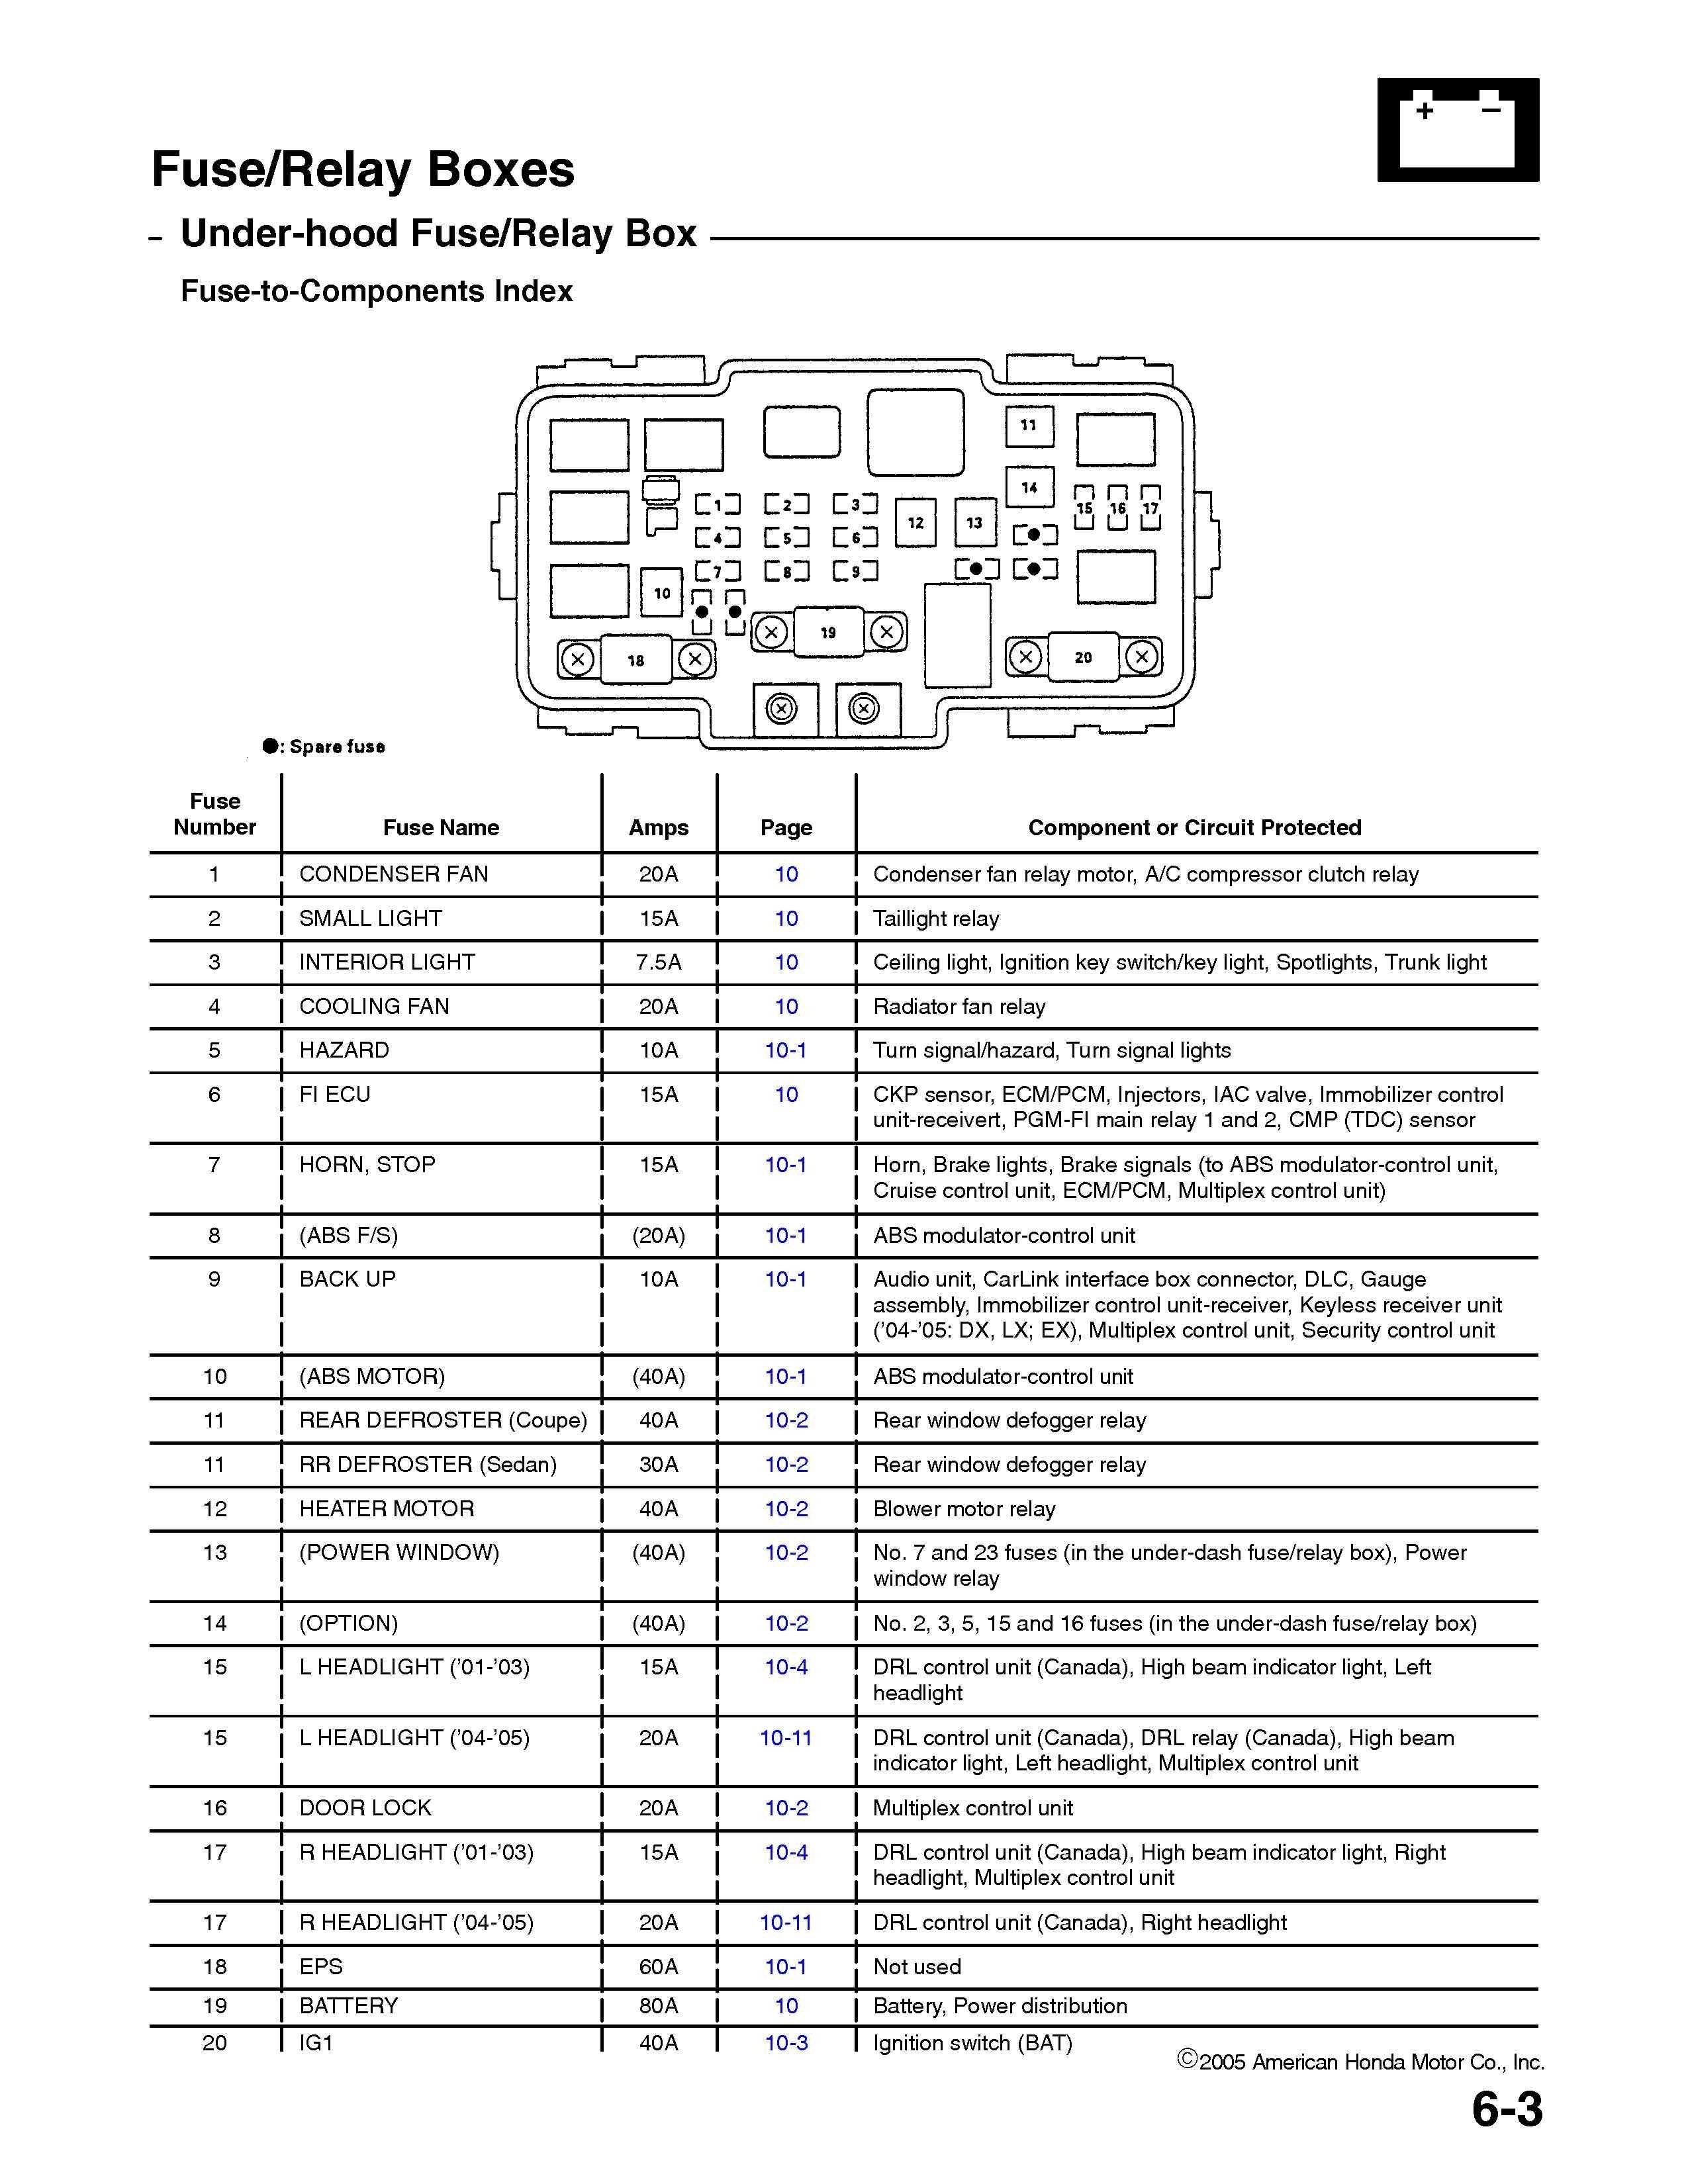 Fuse and Relay Diagram for 2000 Jaguar S-type 3.0 V6 8fd9489 Fuse Diagram 2003 Jaguar S Type R